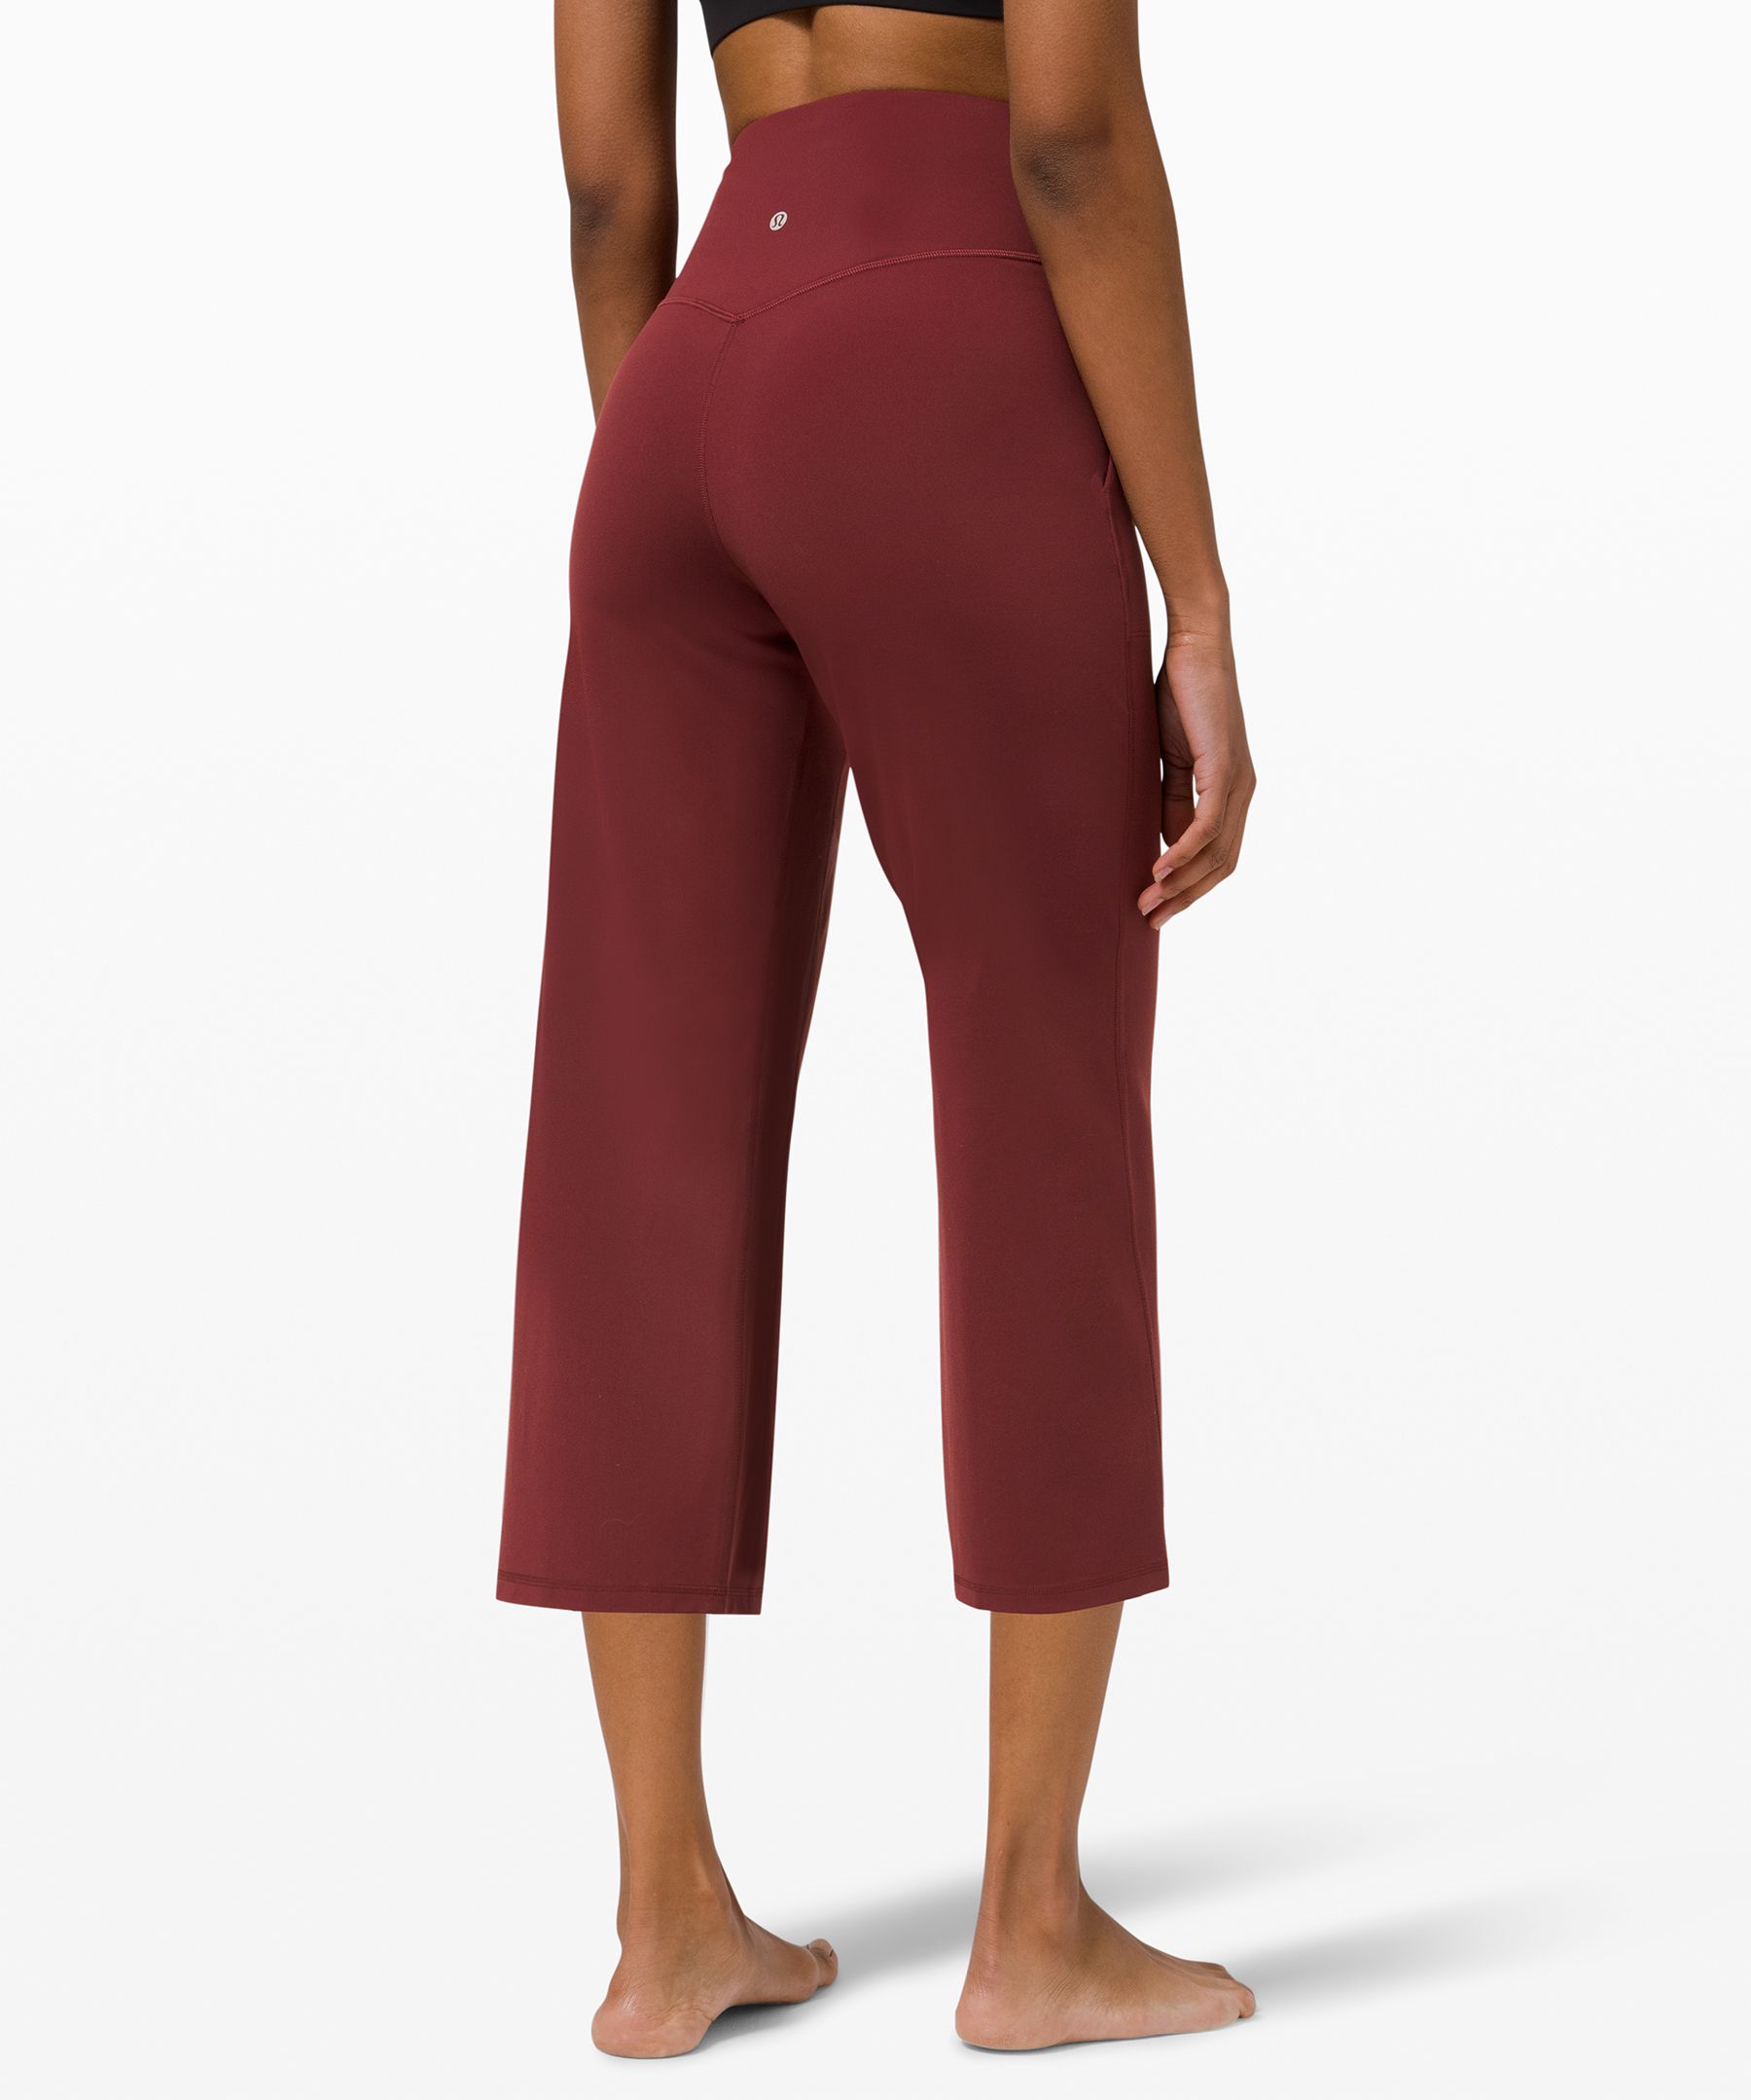 Thoughts on the Align Wide Leg Crop? : r/lululemon